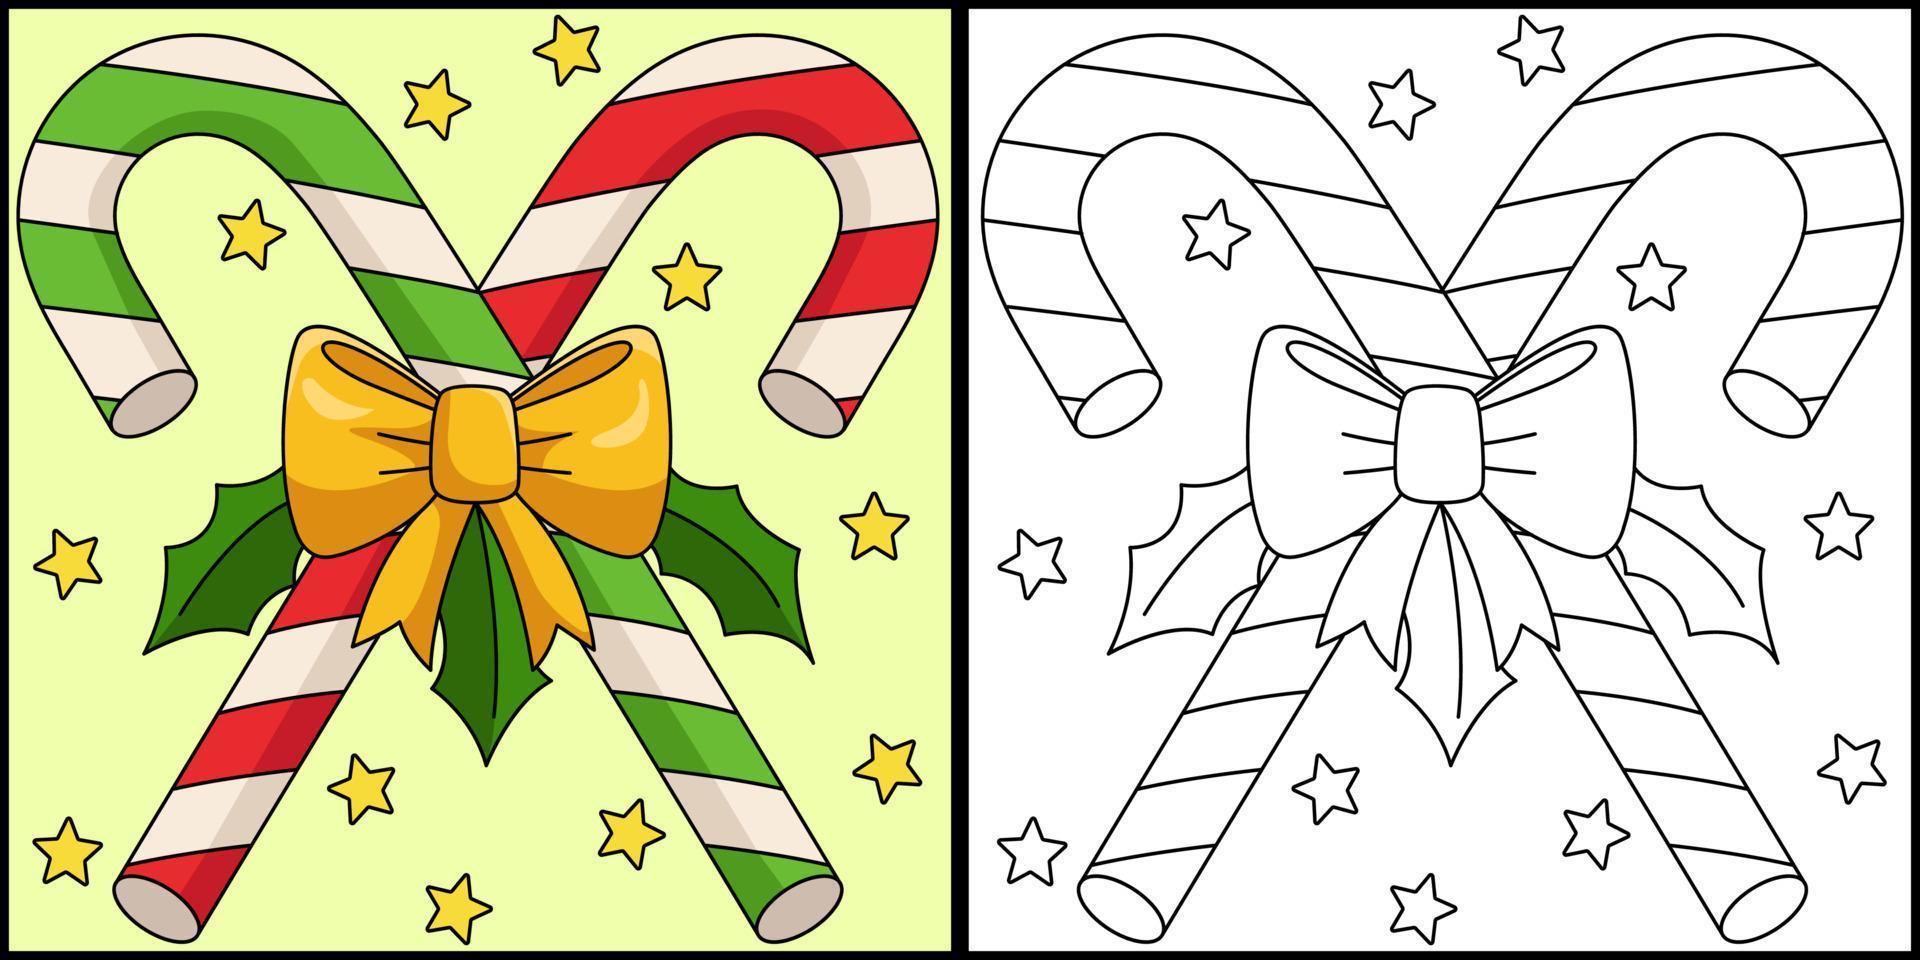 Christmas Candy Cane Coloring Page Illustration vector